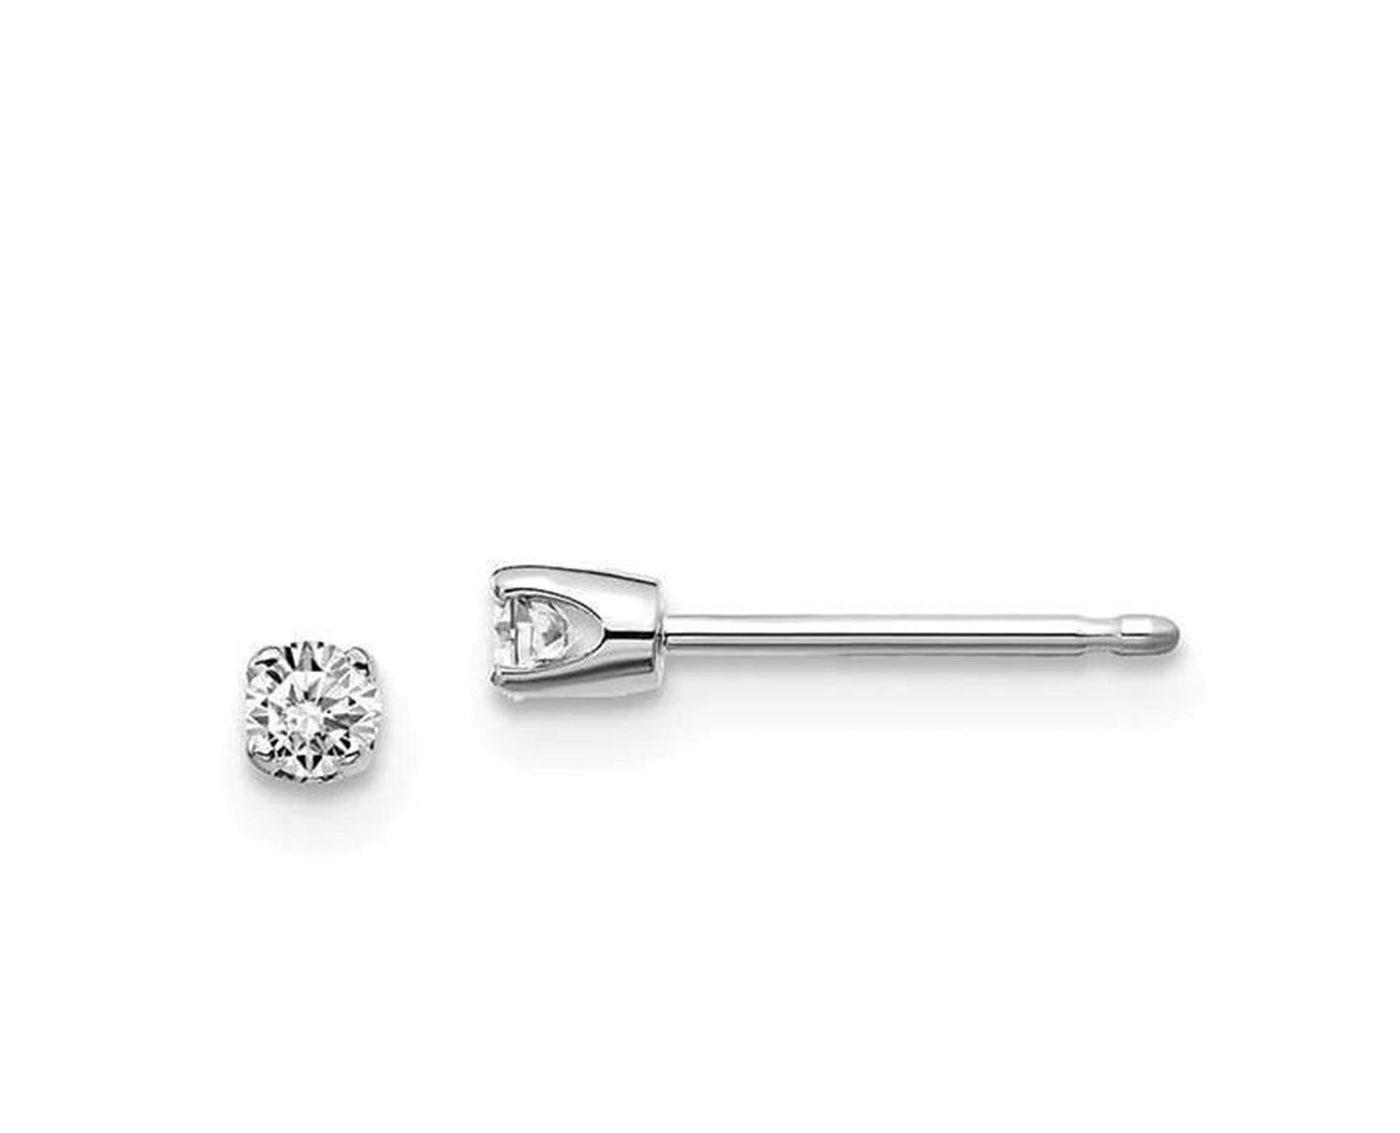 14K White Gold 0.10ctw Diamond Stud Earrings in Four Prong Solid Settings